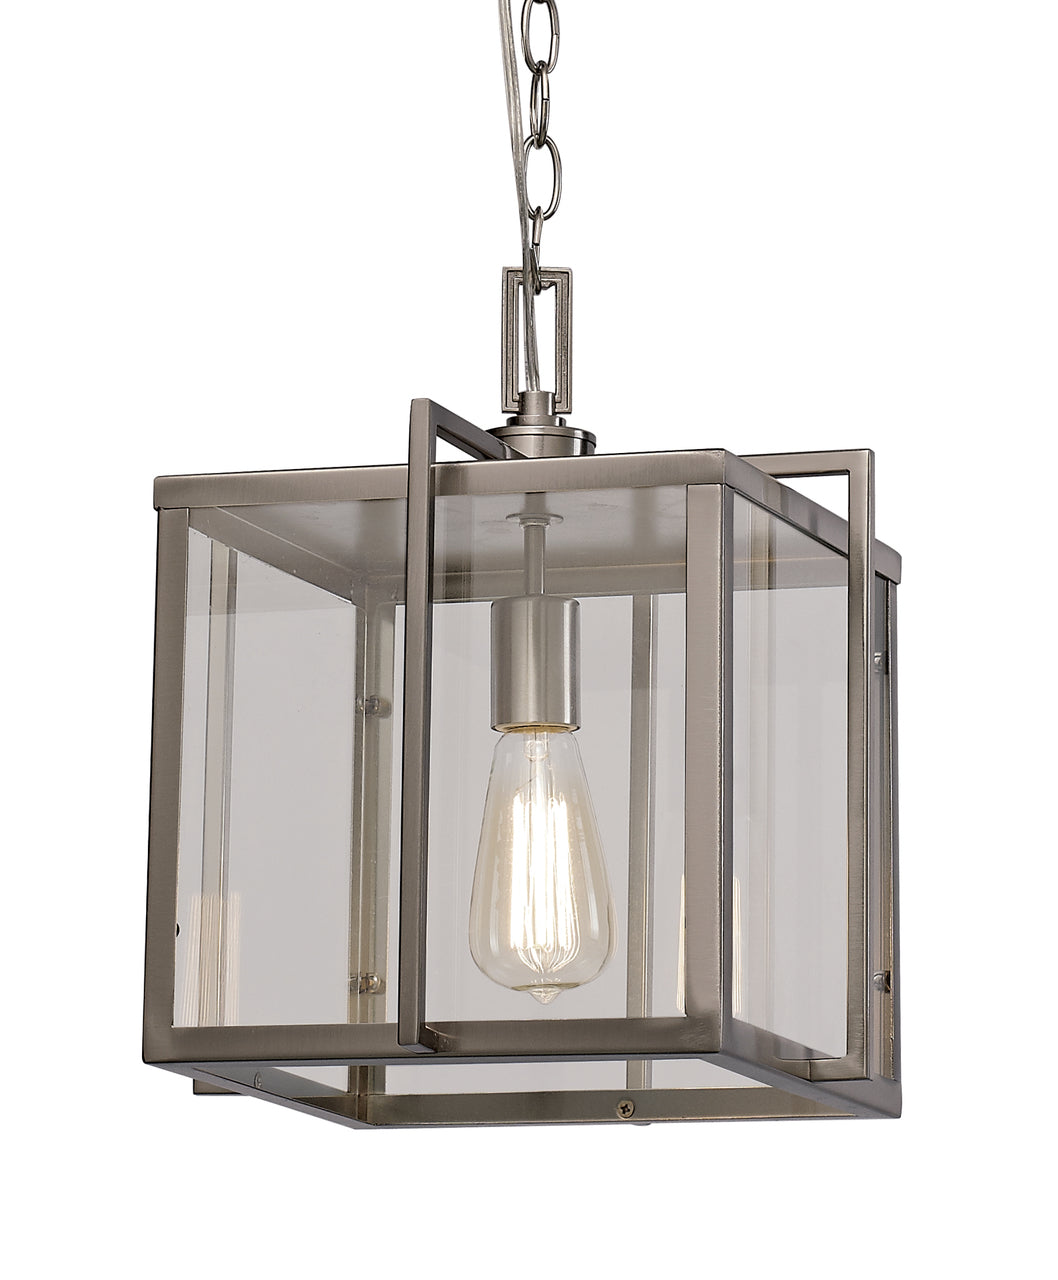 Trans Globe Lighting 10214 BN Eastwood 12" Indoor Brushed Nickel Industrial Pendant with Open Box Contemporary Design